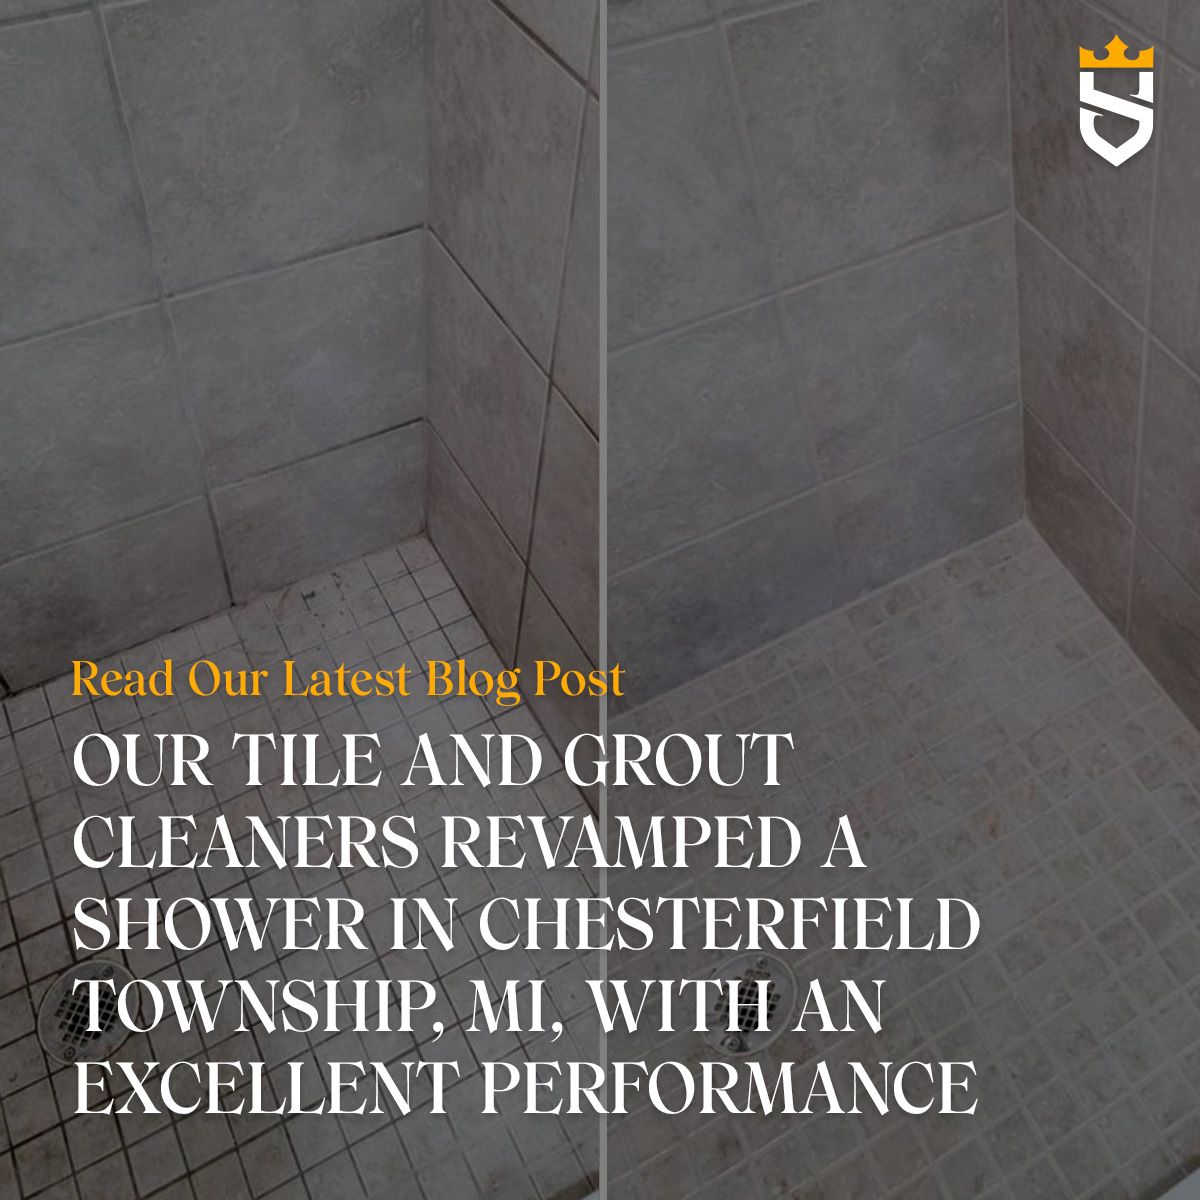 Our Tile and Grout Cleaners Revamped a Shower in Chesterfield Township, MI, With an Excellent Performance